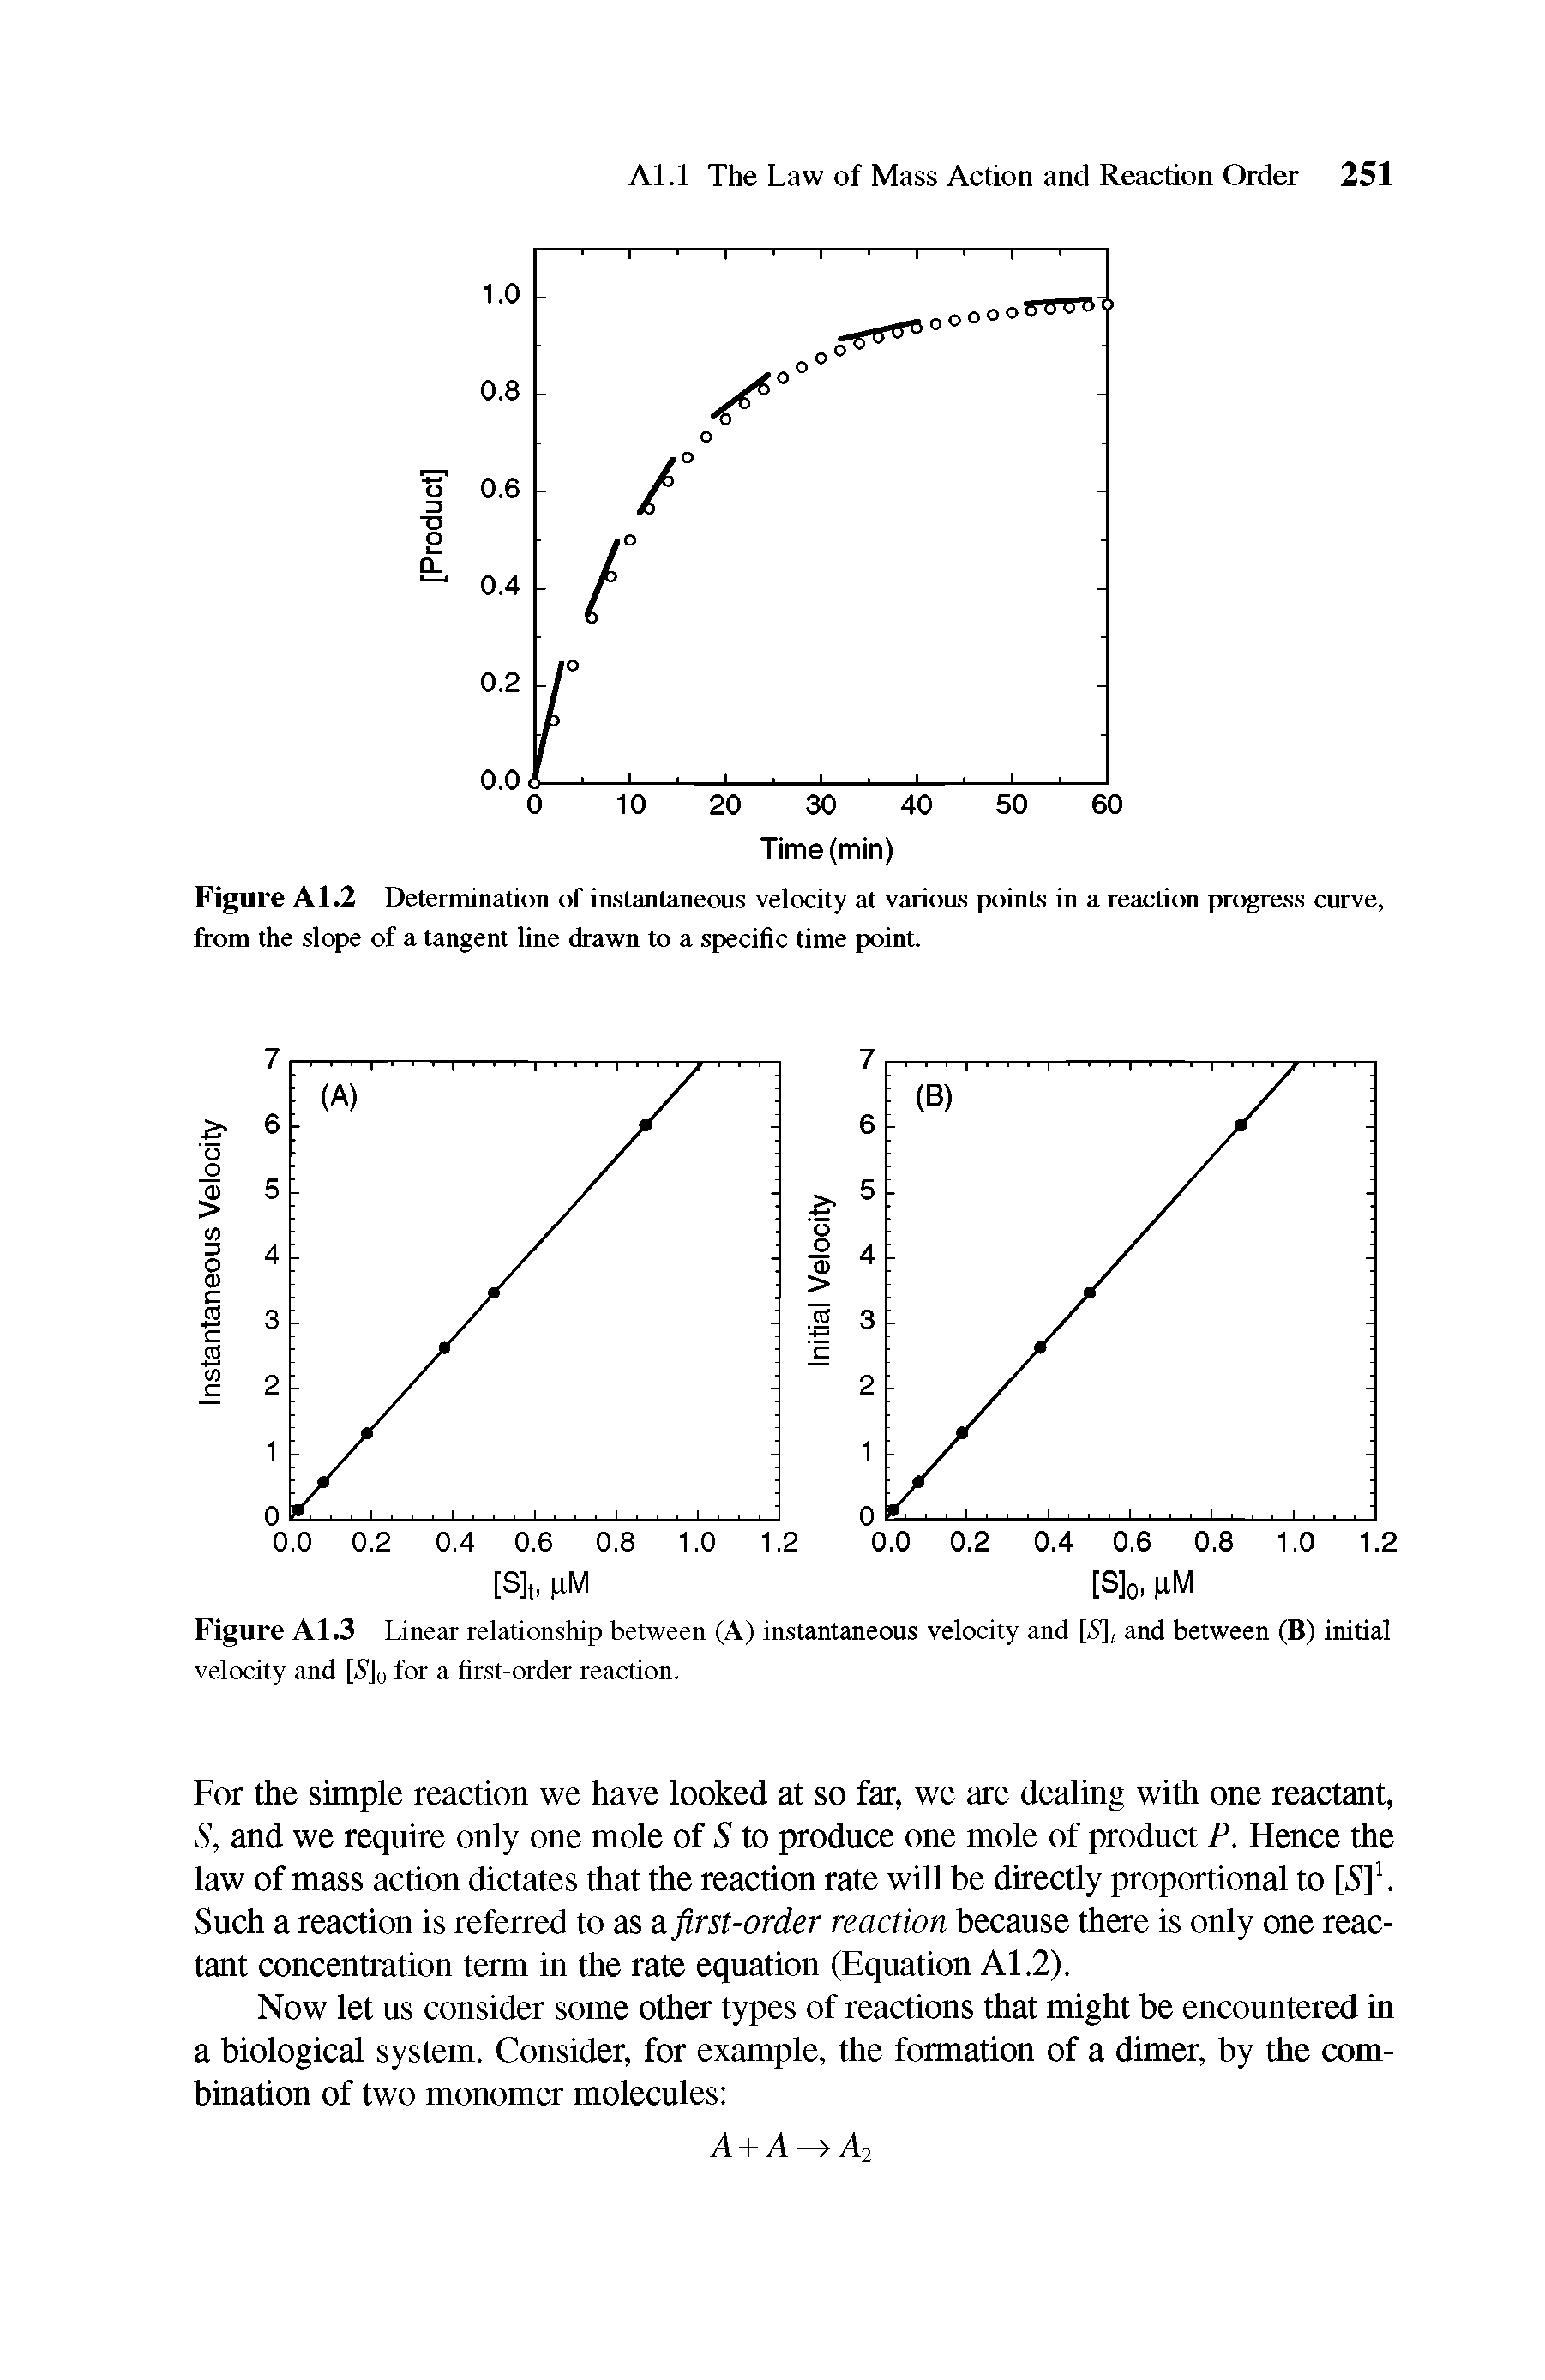 Figure A 1.2 Determination of instantaneous velocity at various points in a reaction progress curve, from the slope of a tangent line drawn to a specific time point.